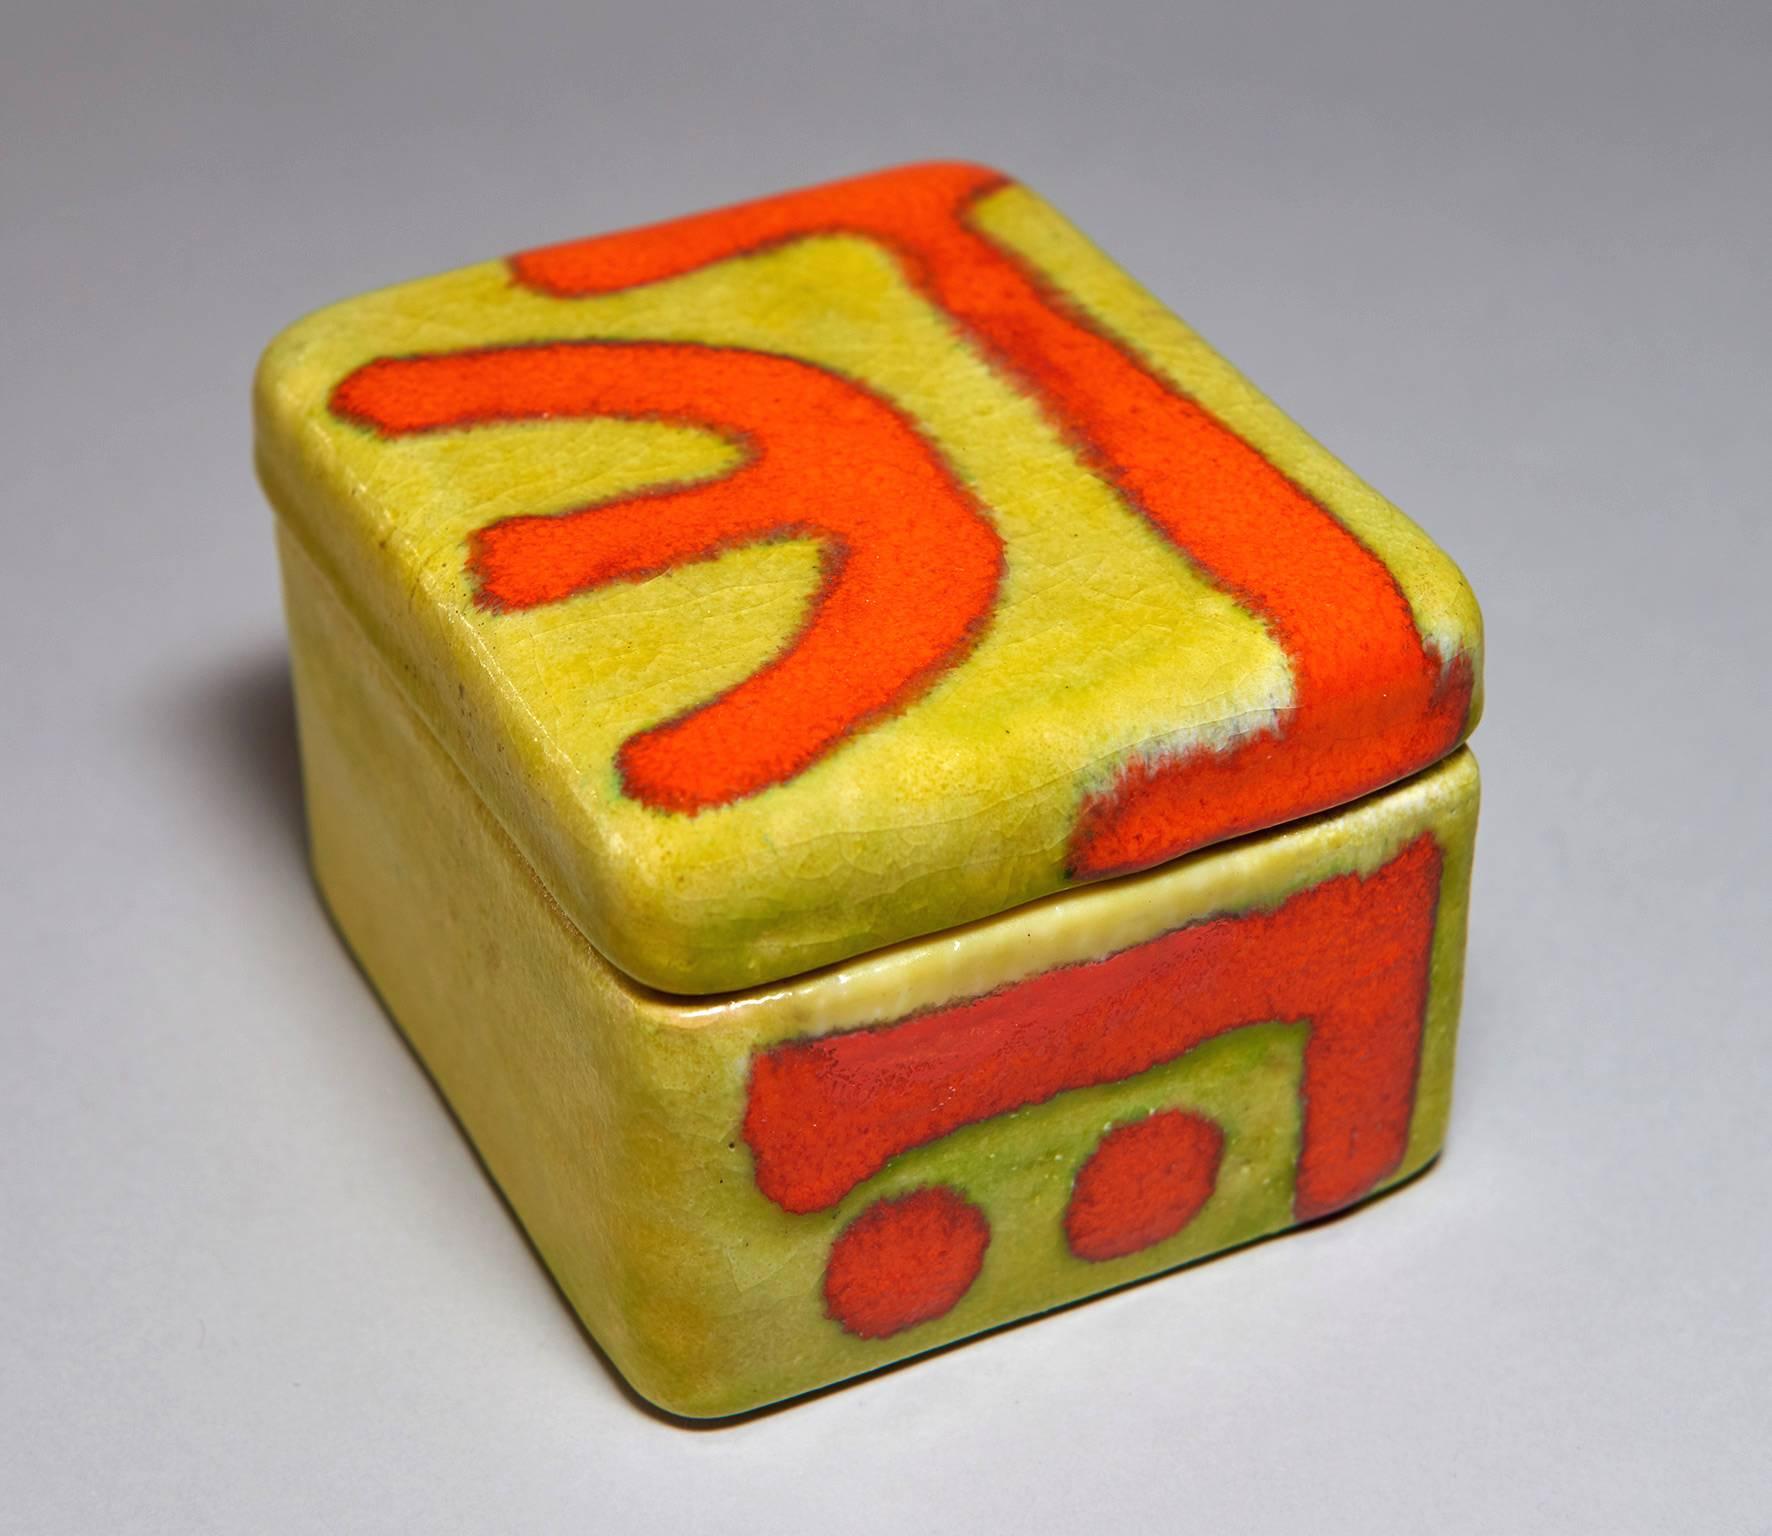 This boldly glazed, covered ceramic box was made by Italy's foremost post-war ceramist -- Guido Gambone -- in his Florence, Italy atelier in the 1950s. It can be used to house jewelry, candies, nuts, cigarettes, keys, and the like. Signed GAMBONE